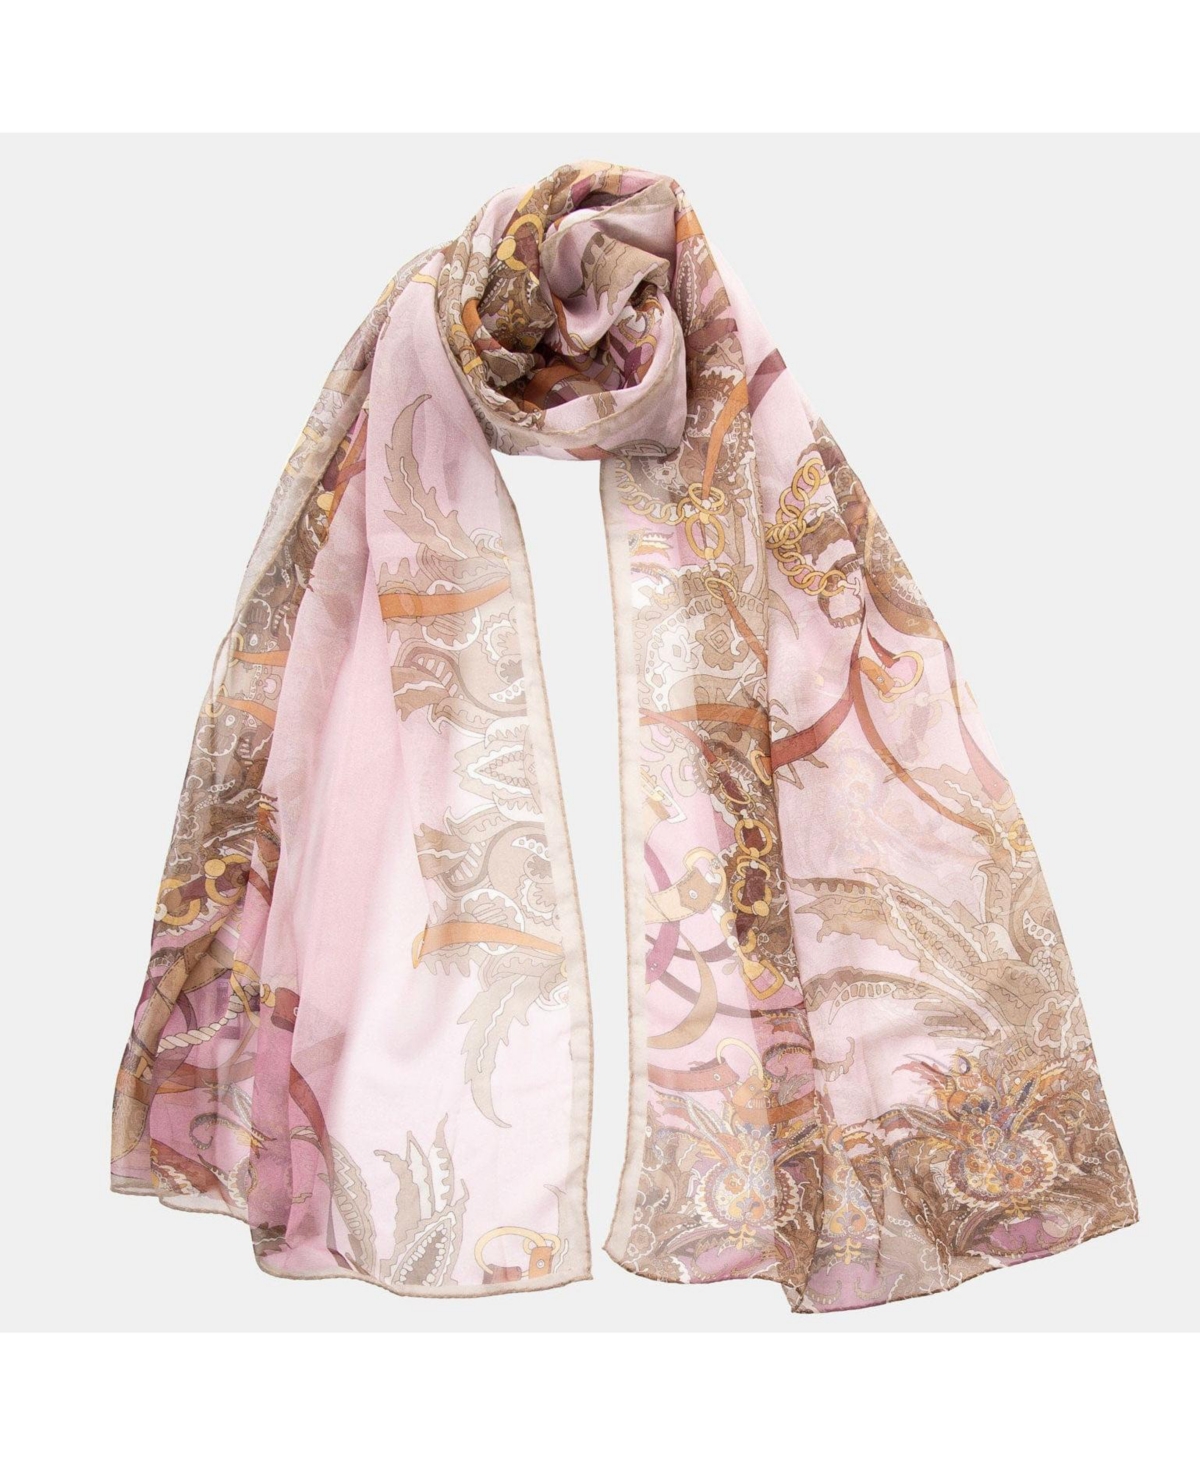 Alessandra - Long Sheer Silk Scarf for Women - Cameo pink